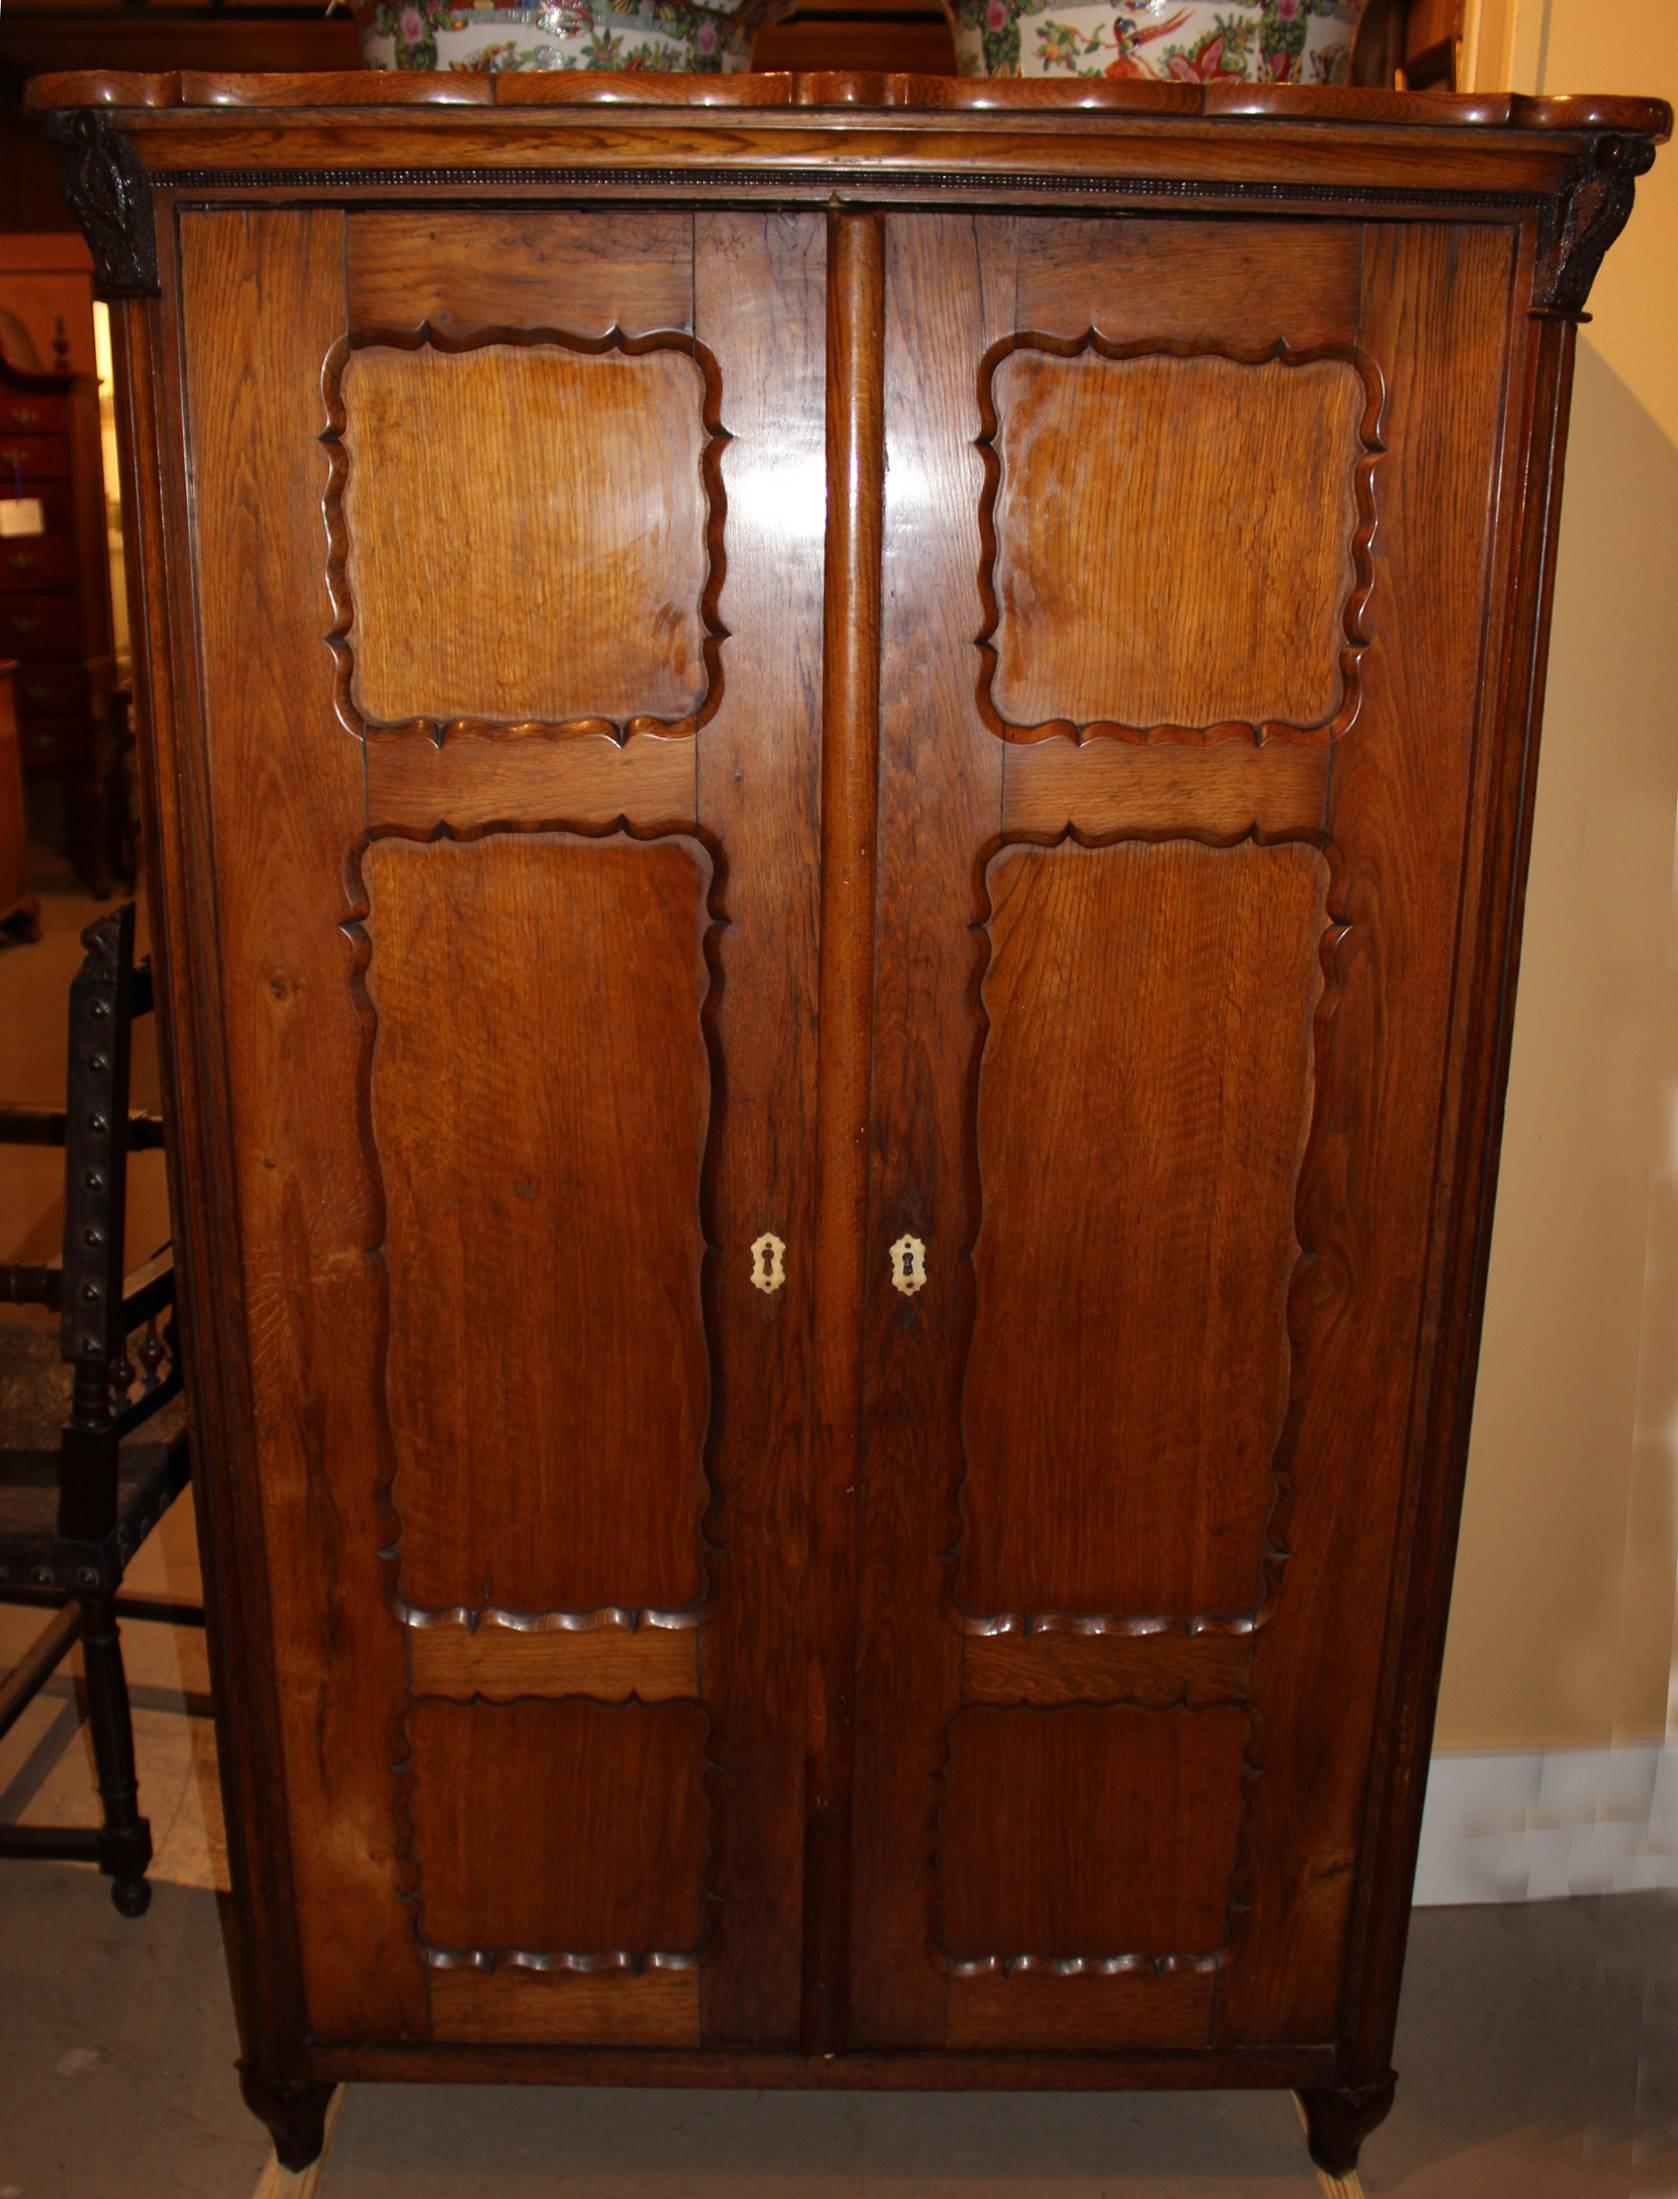 A diminutive size French fruitwood armoire in a warm brown finish, with shaped top over two tri-paneled doors flanked by canted fluted columns with carved owl capitals, all supported by two front shaped feet and rear block feet. Dates to the 19th